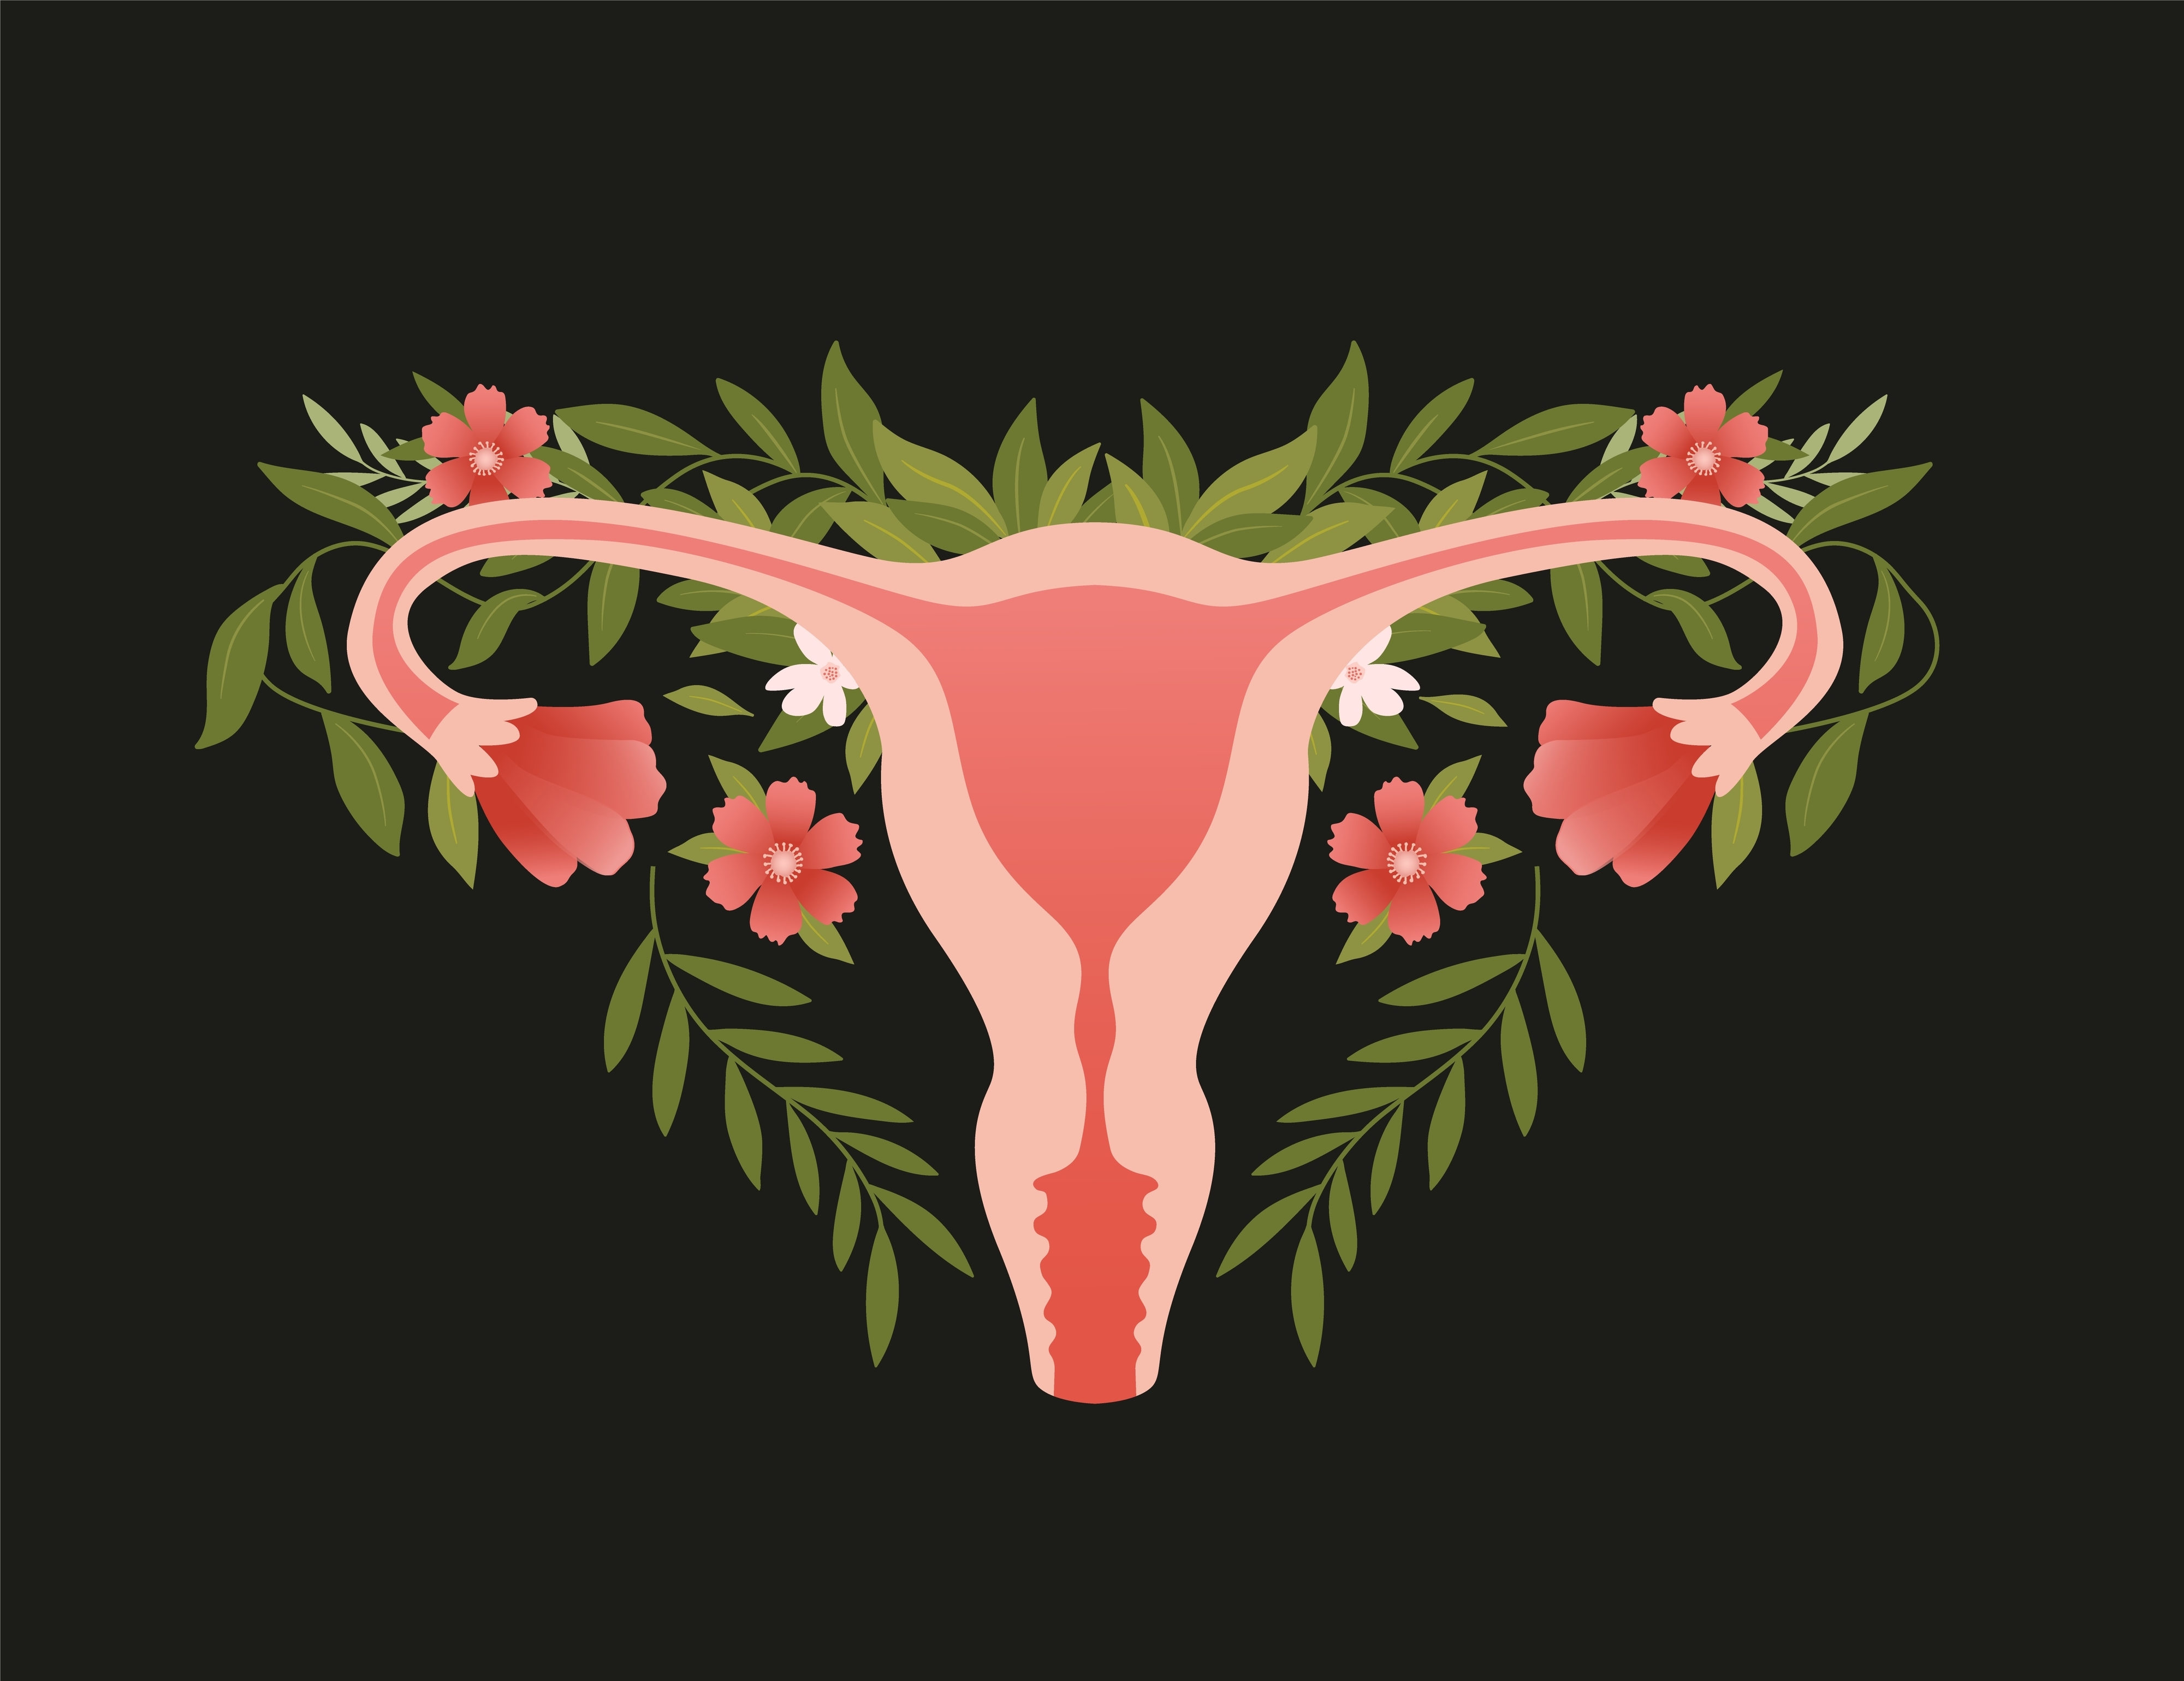 A stylized image of a female reproductive system with leaves around it.